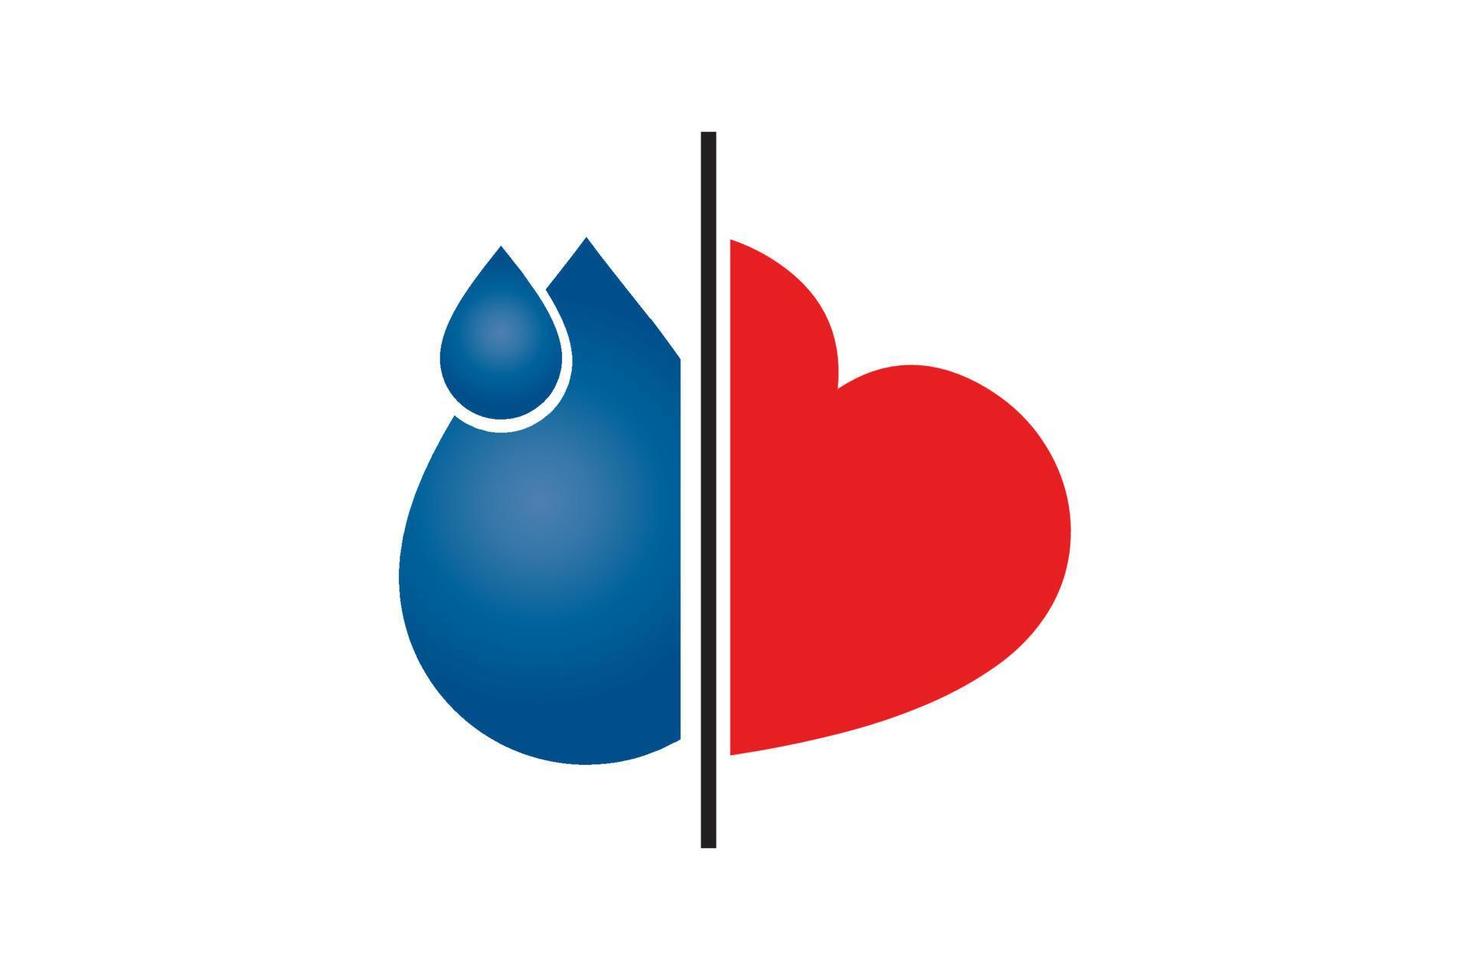 Water love icon. water drop sign. vector illustration elements